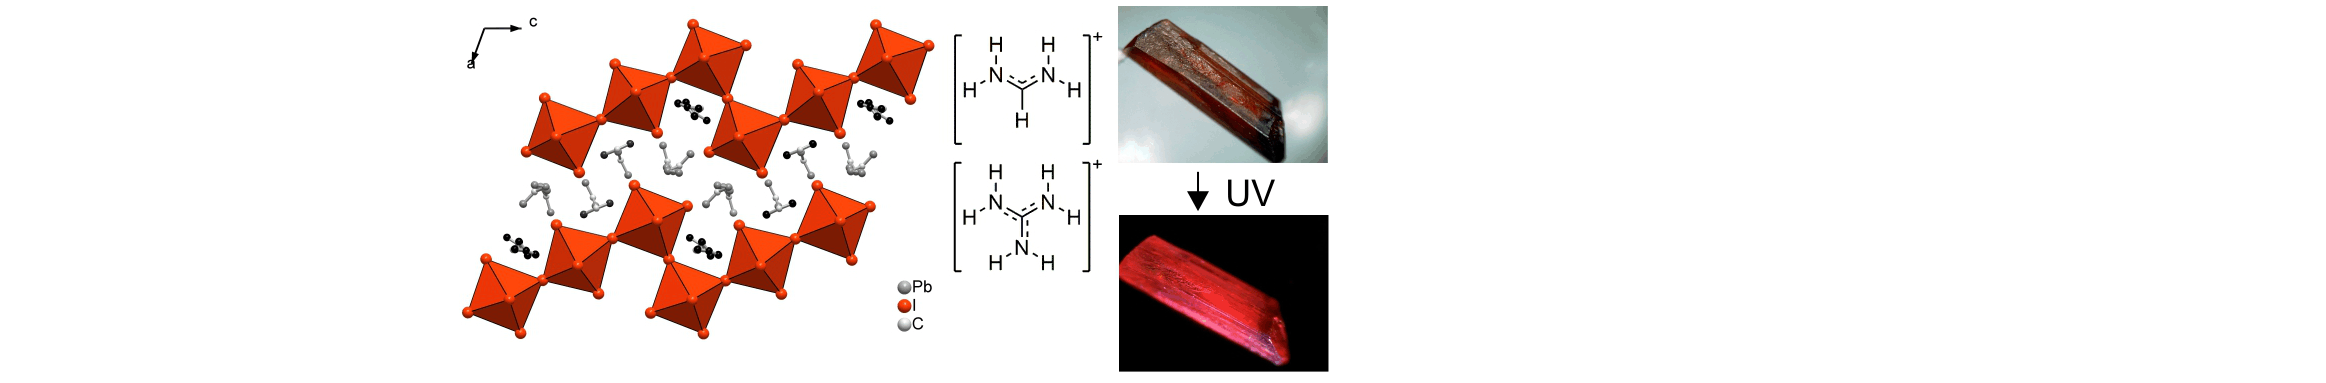 Guanidinium-formamidinium lead iodide: a layered perovskite-related compound with red luminescence at room temperature